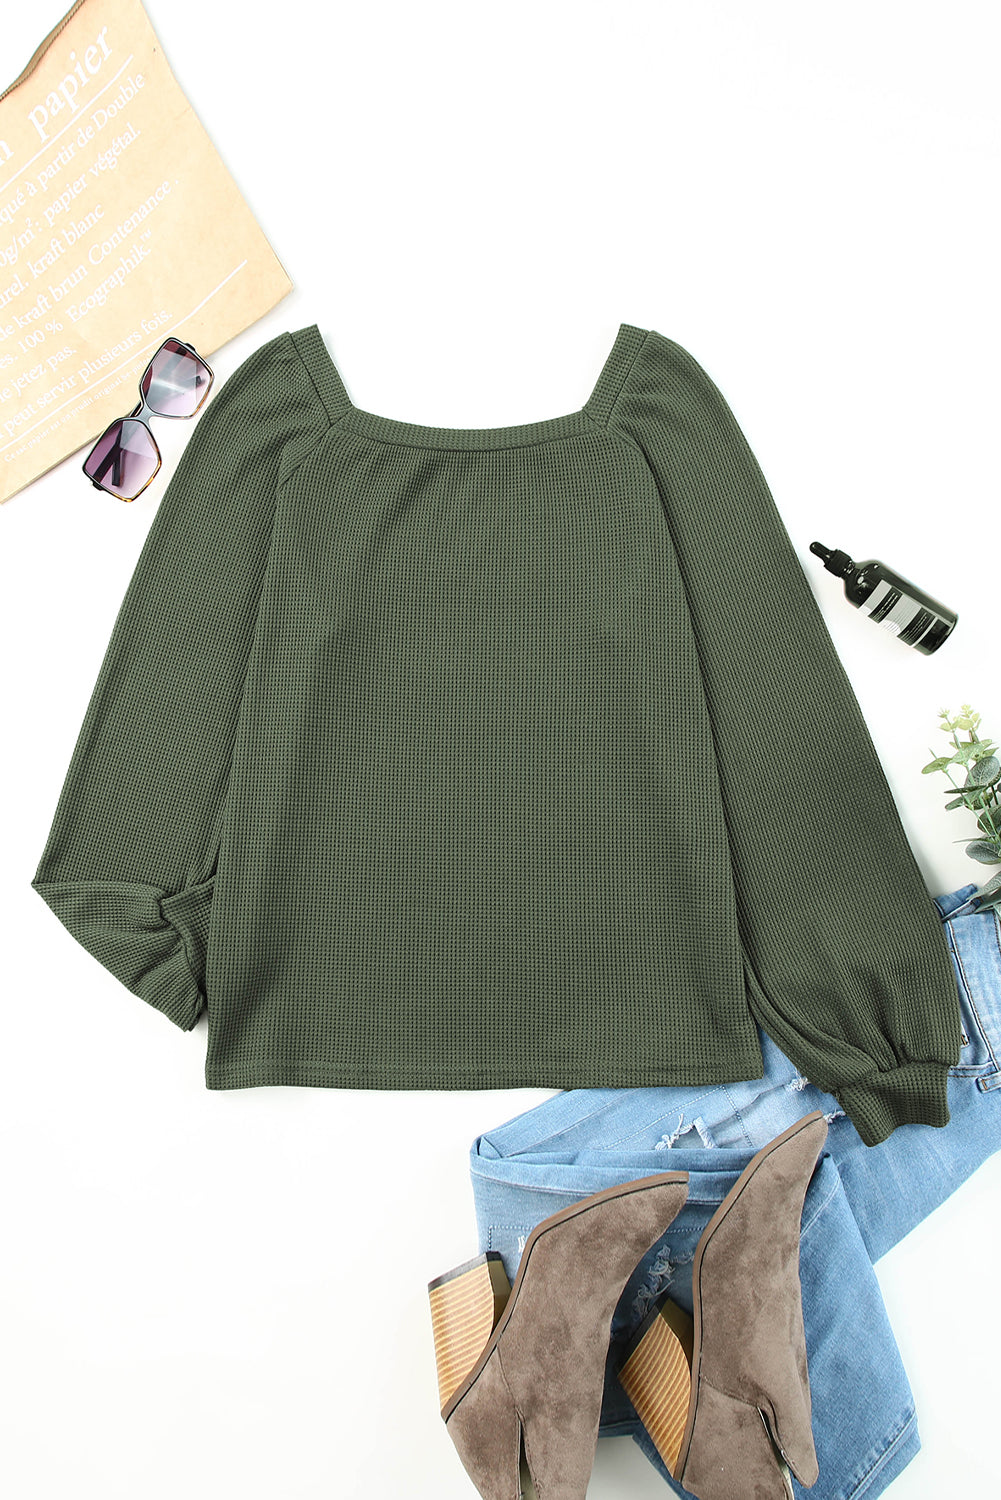 Waffle knit Square Neck Pullover Top